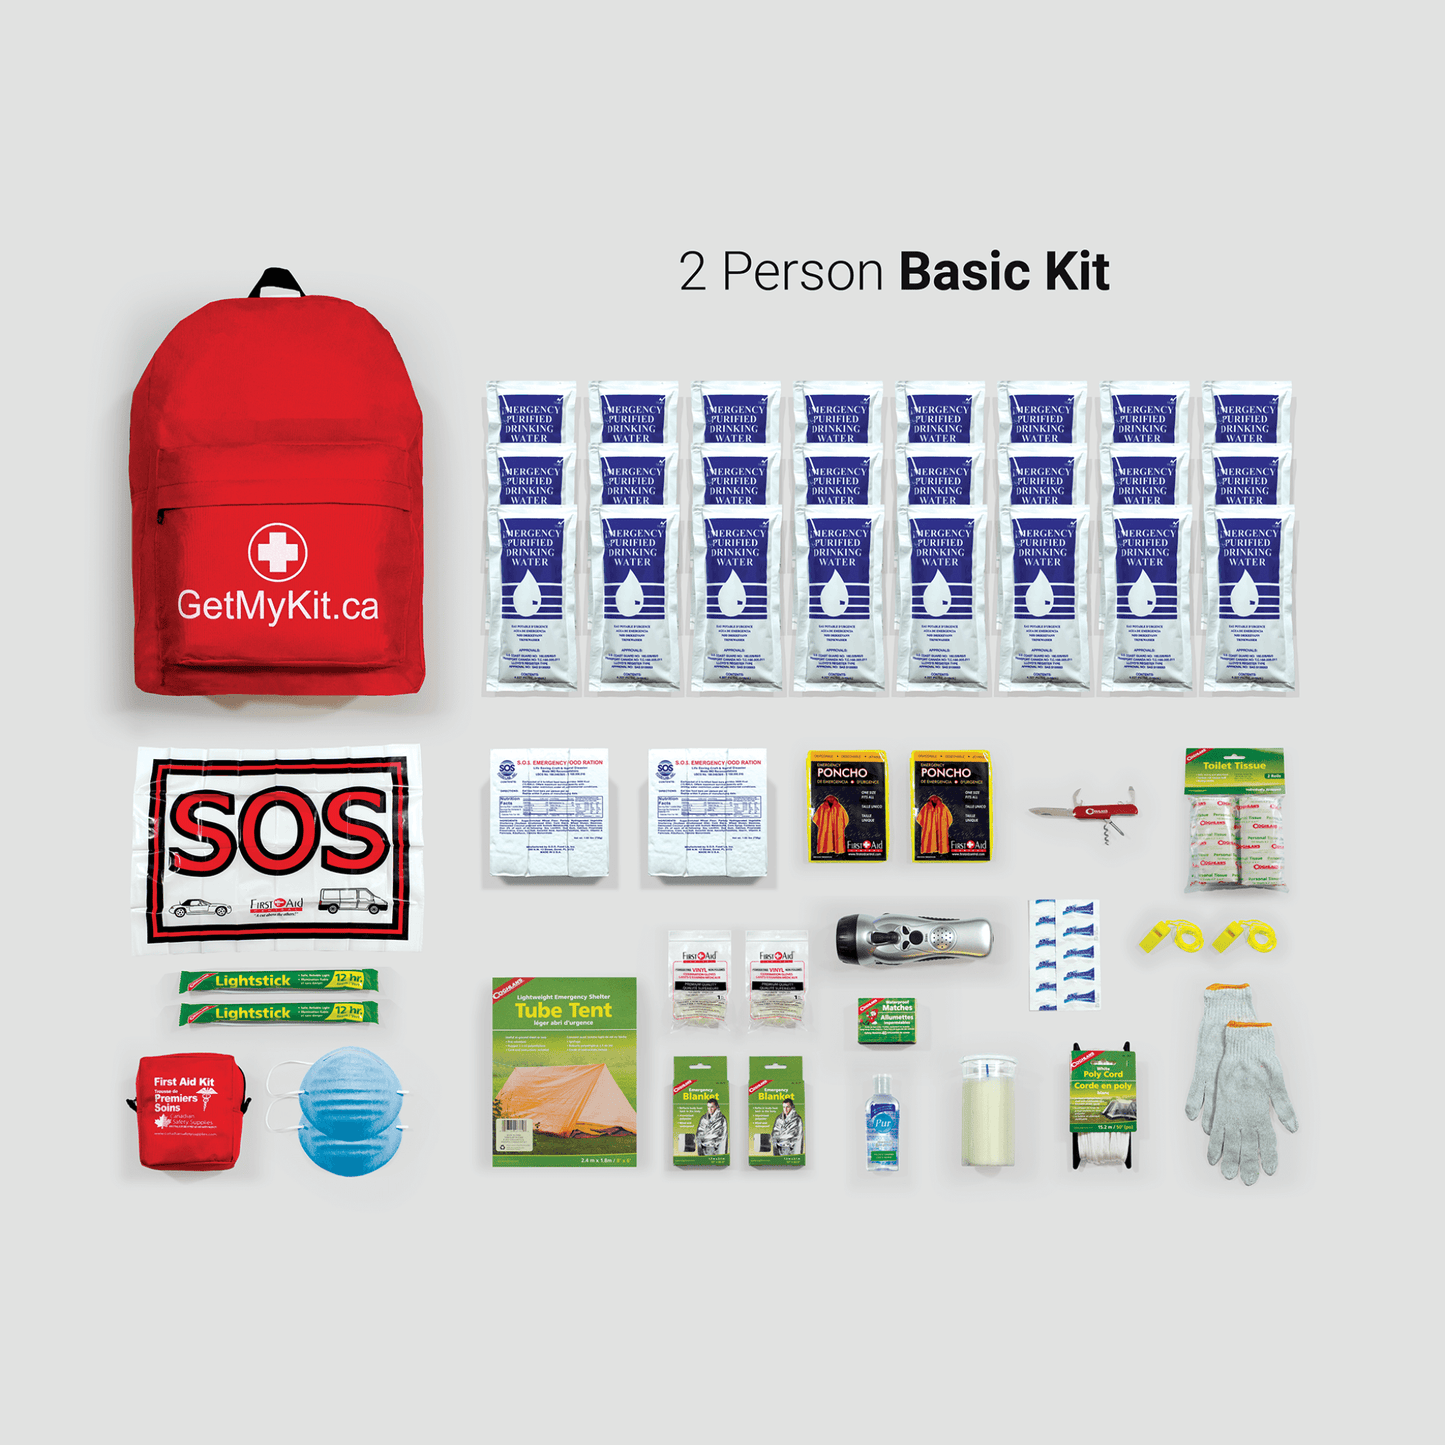 A two person basic emergency kit and its contents.